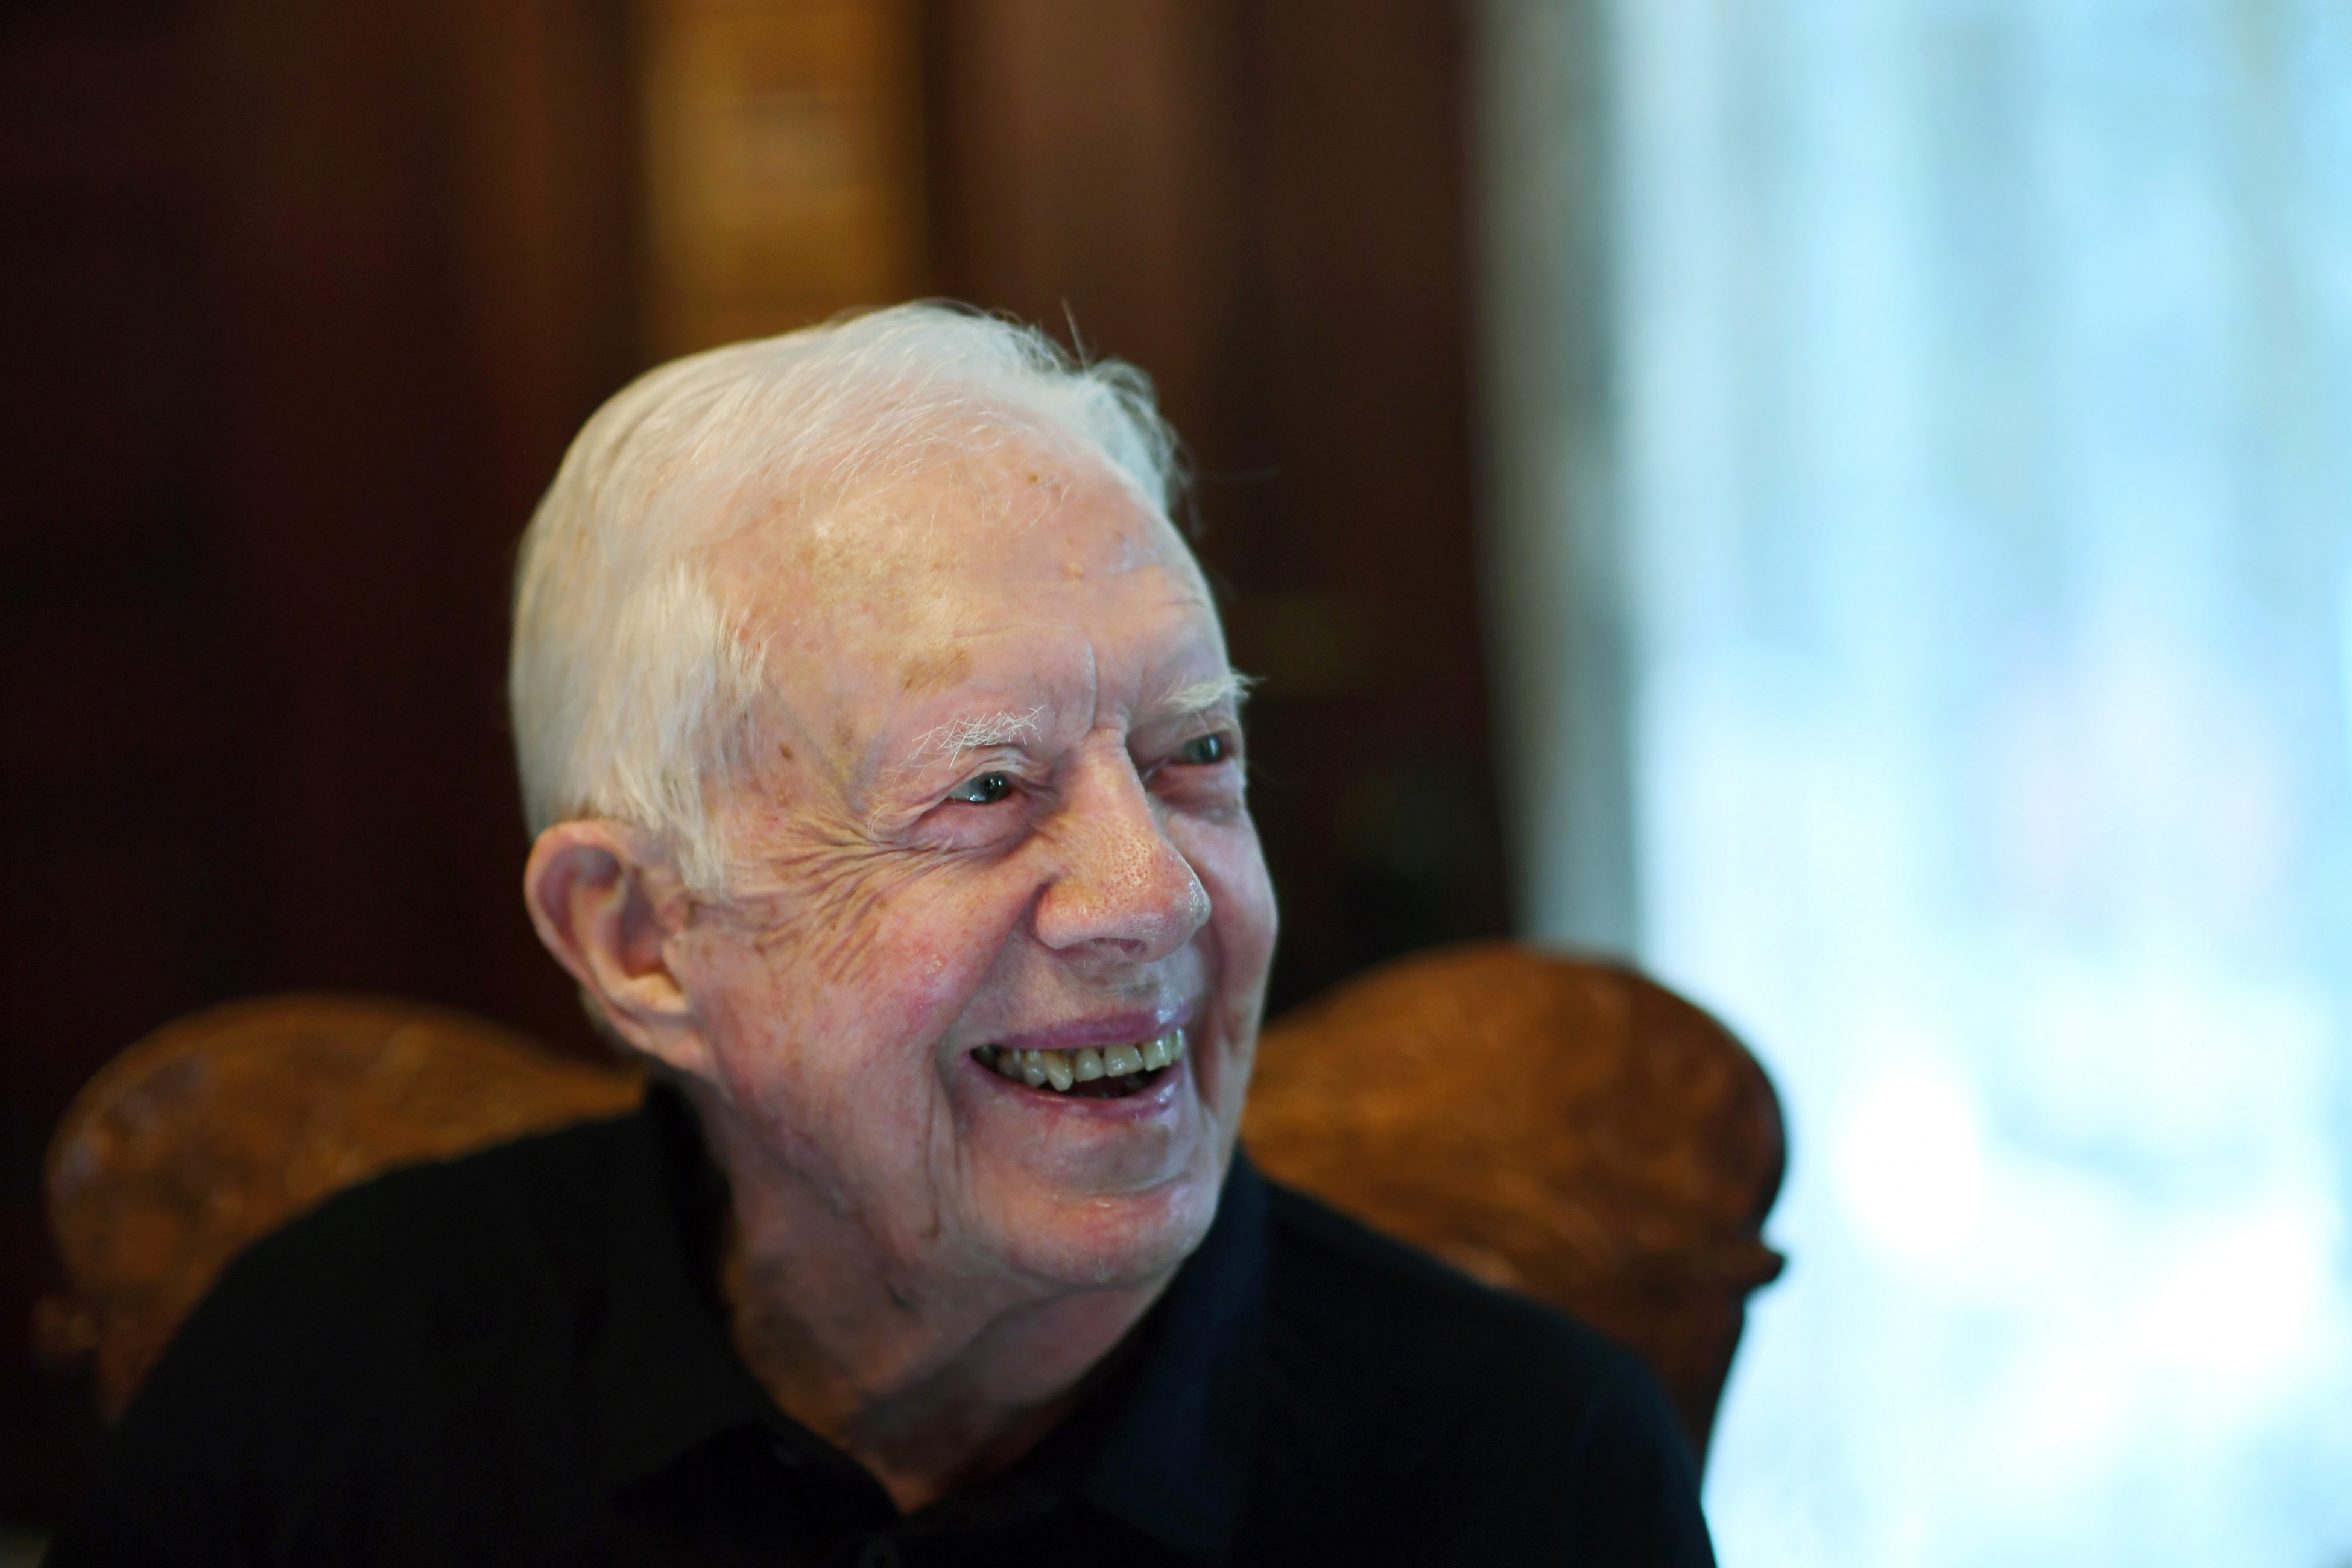 Jimmy Carter having dinner at the home of his close friend, Jill Stuckey on August 4, 2018 in Plains, Georgia | Source: Getty Images